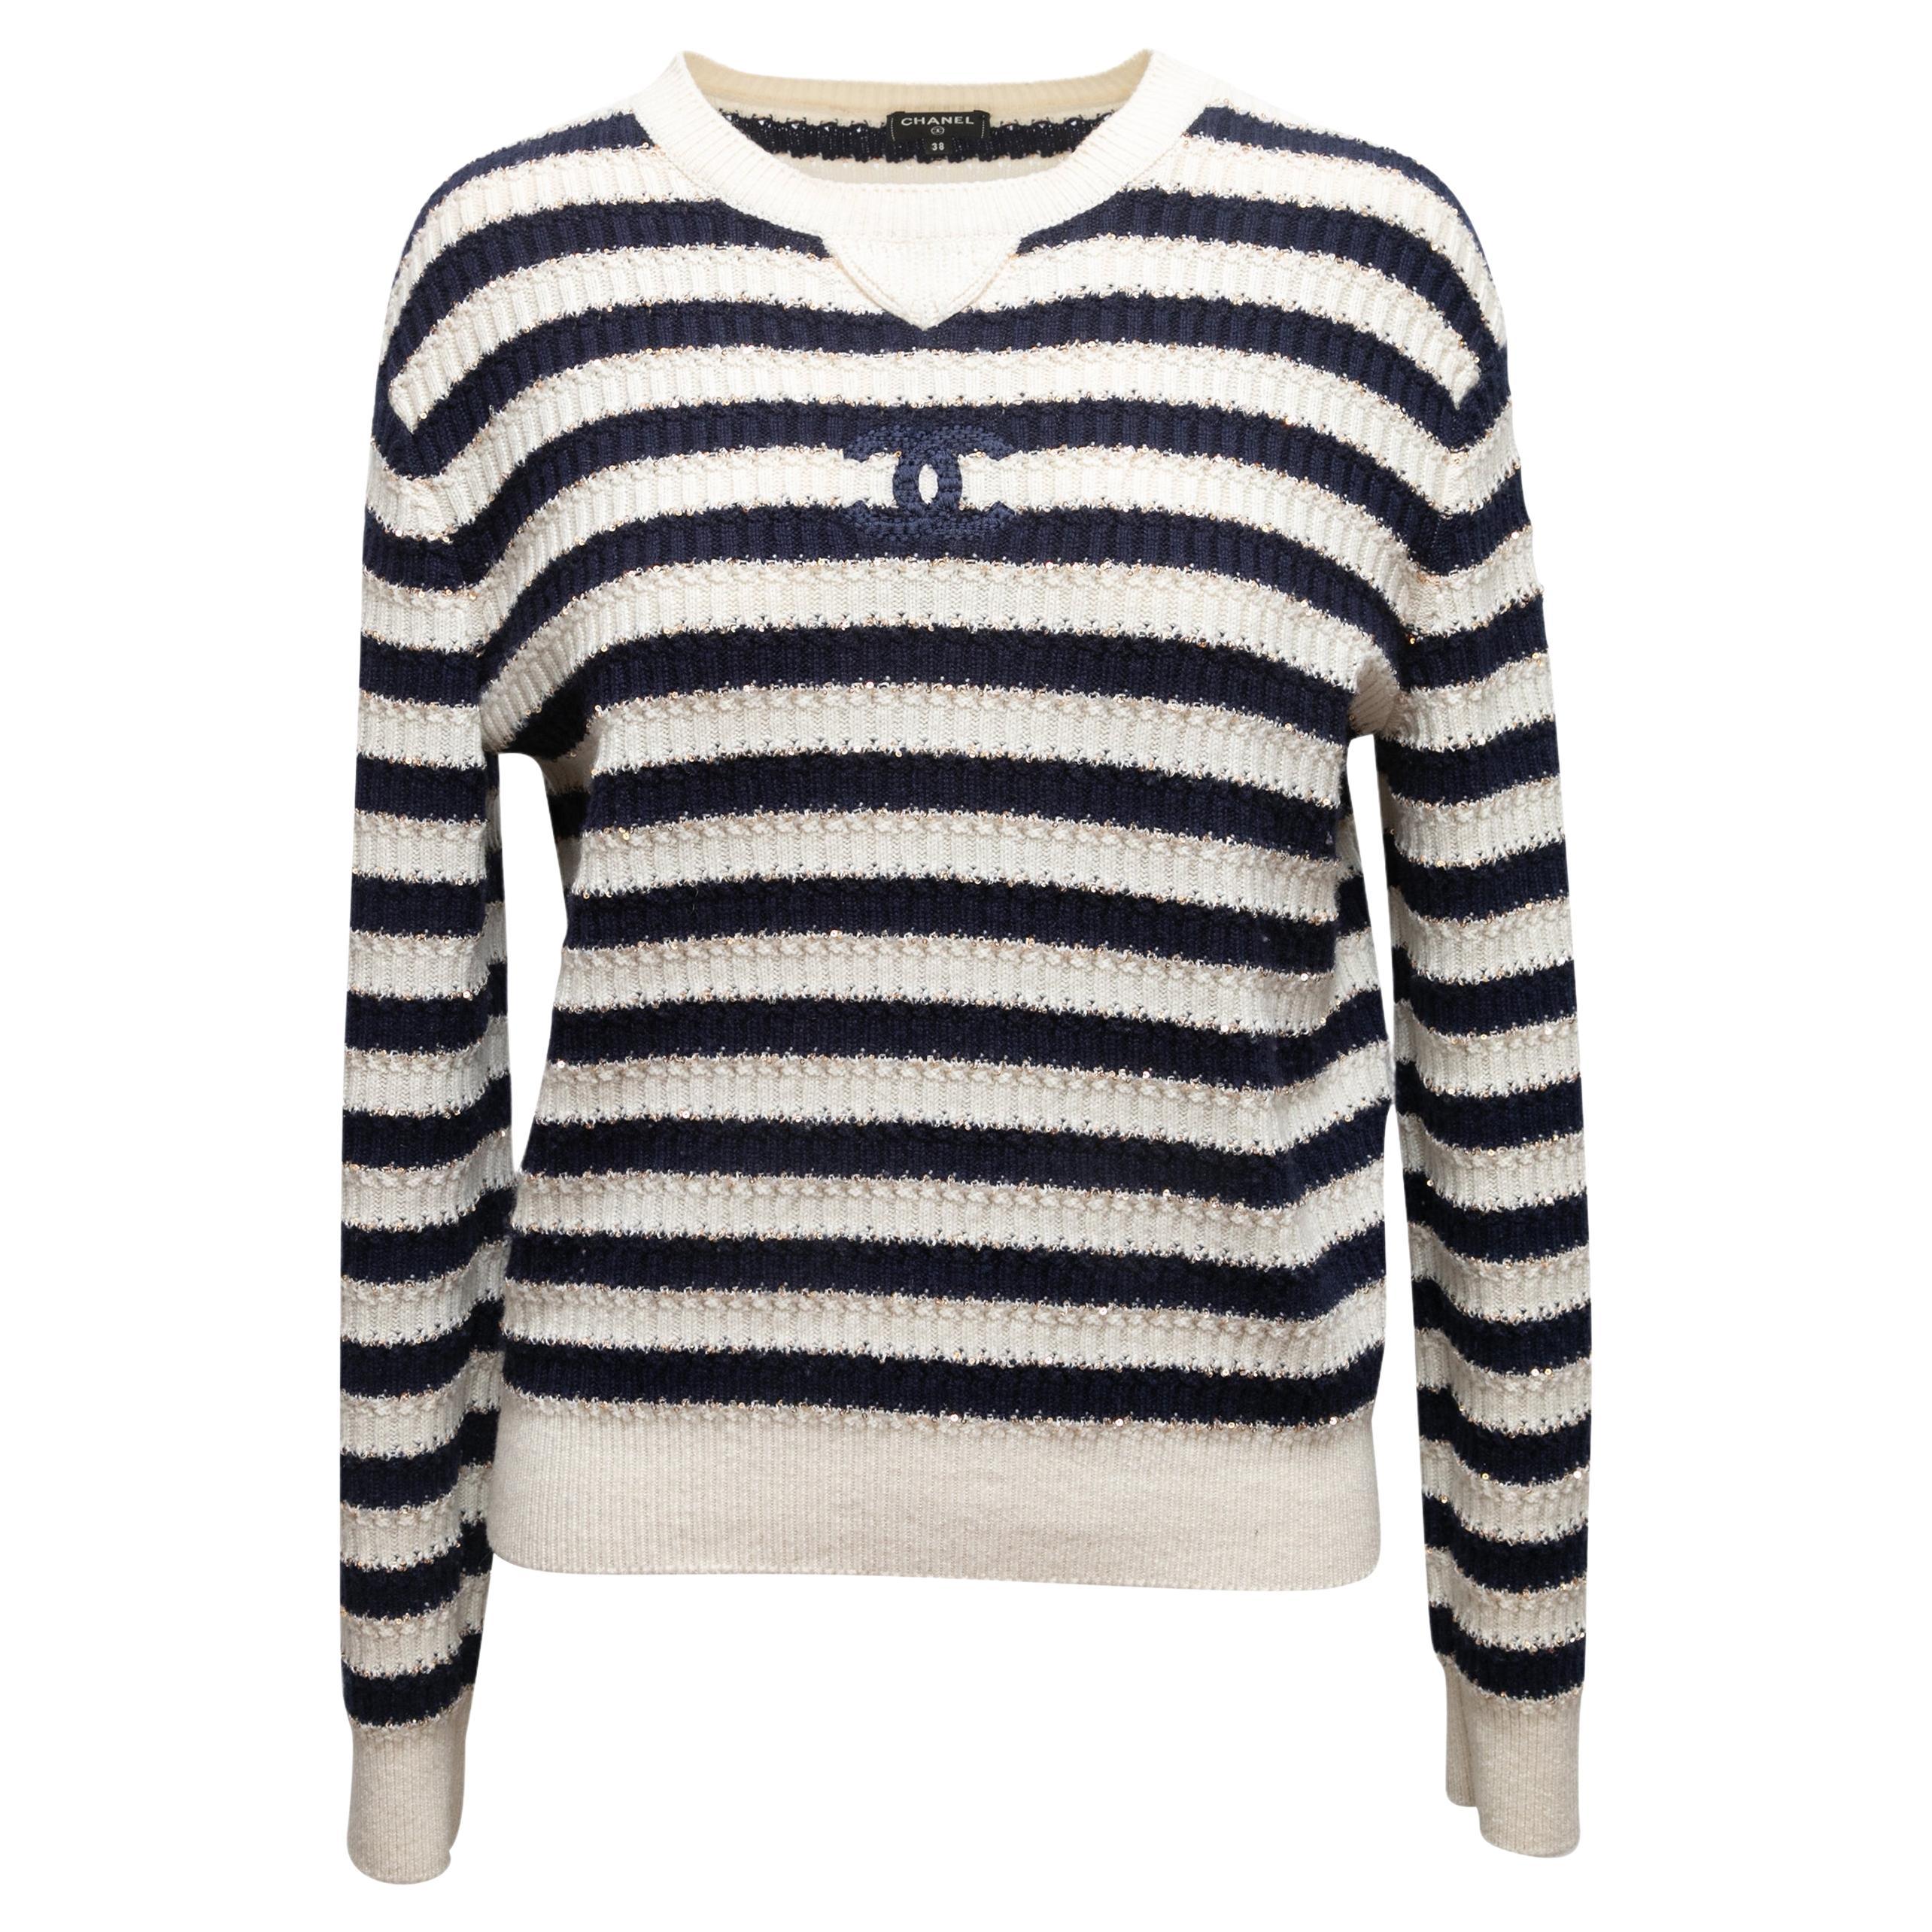 Navy & White Chanel Cruise 2021 Striped Cashmere Sweater Size FR 38